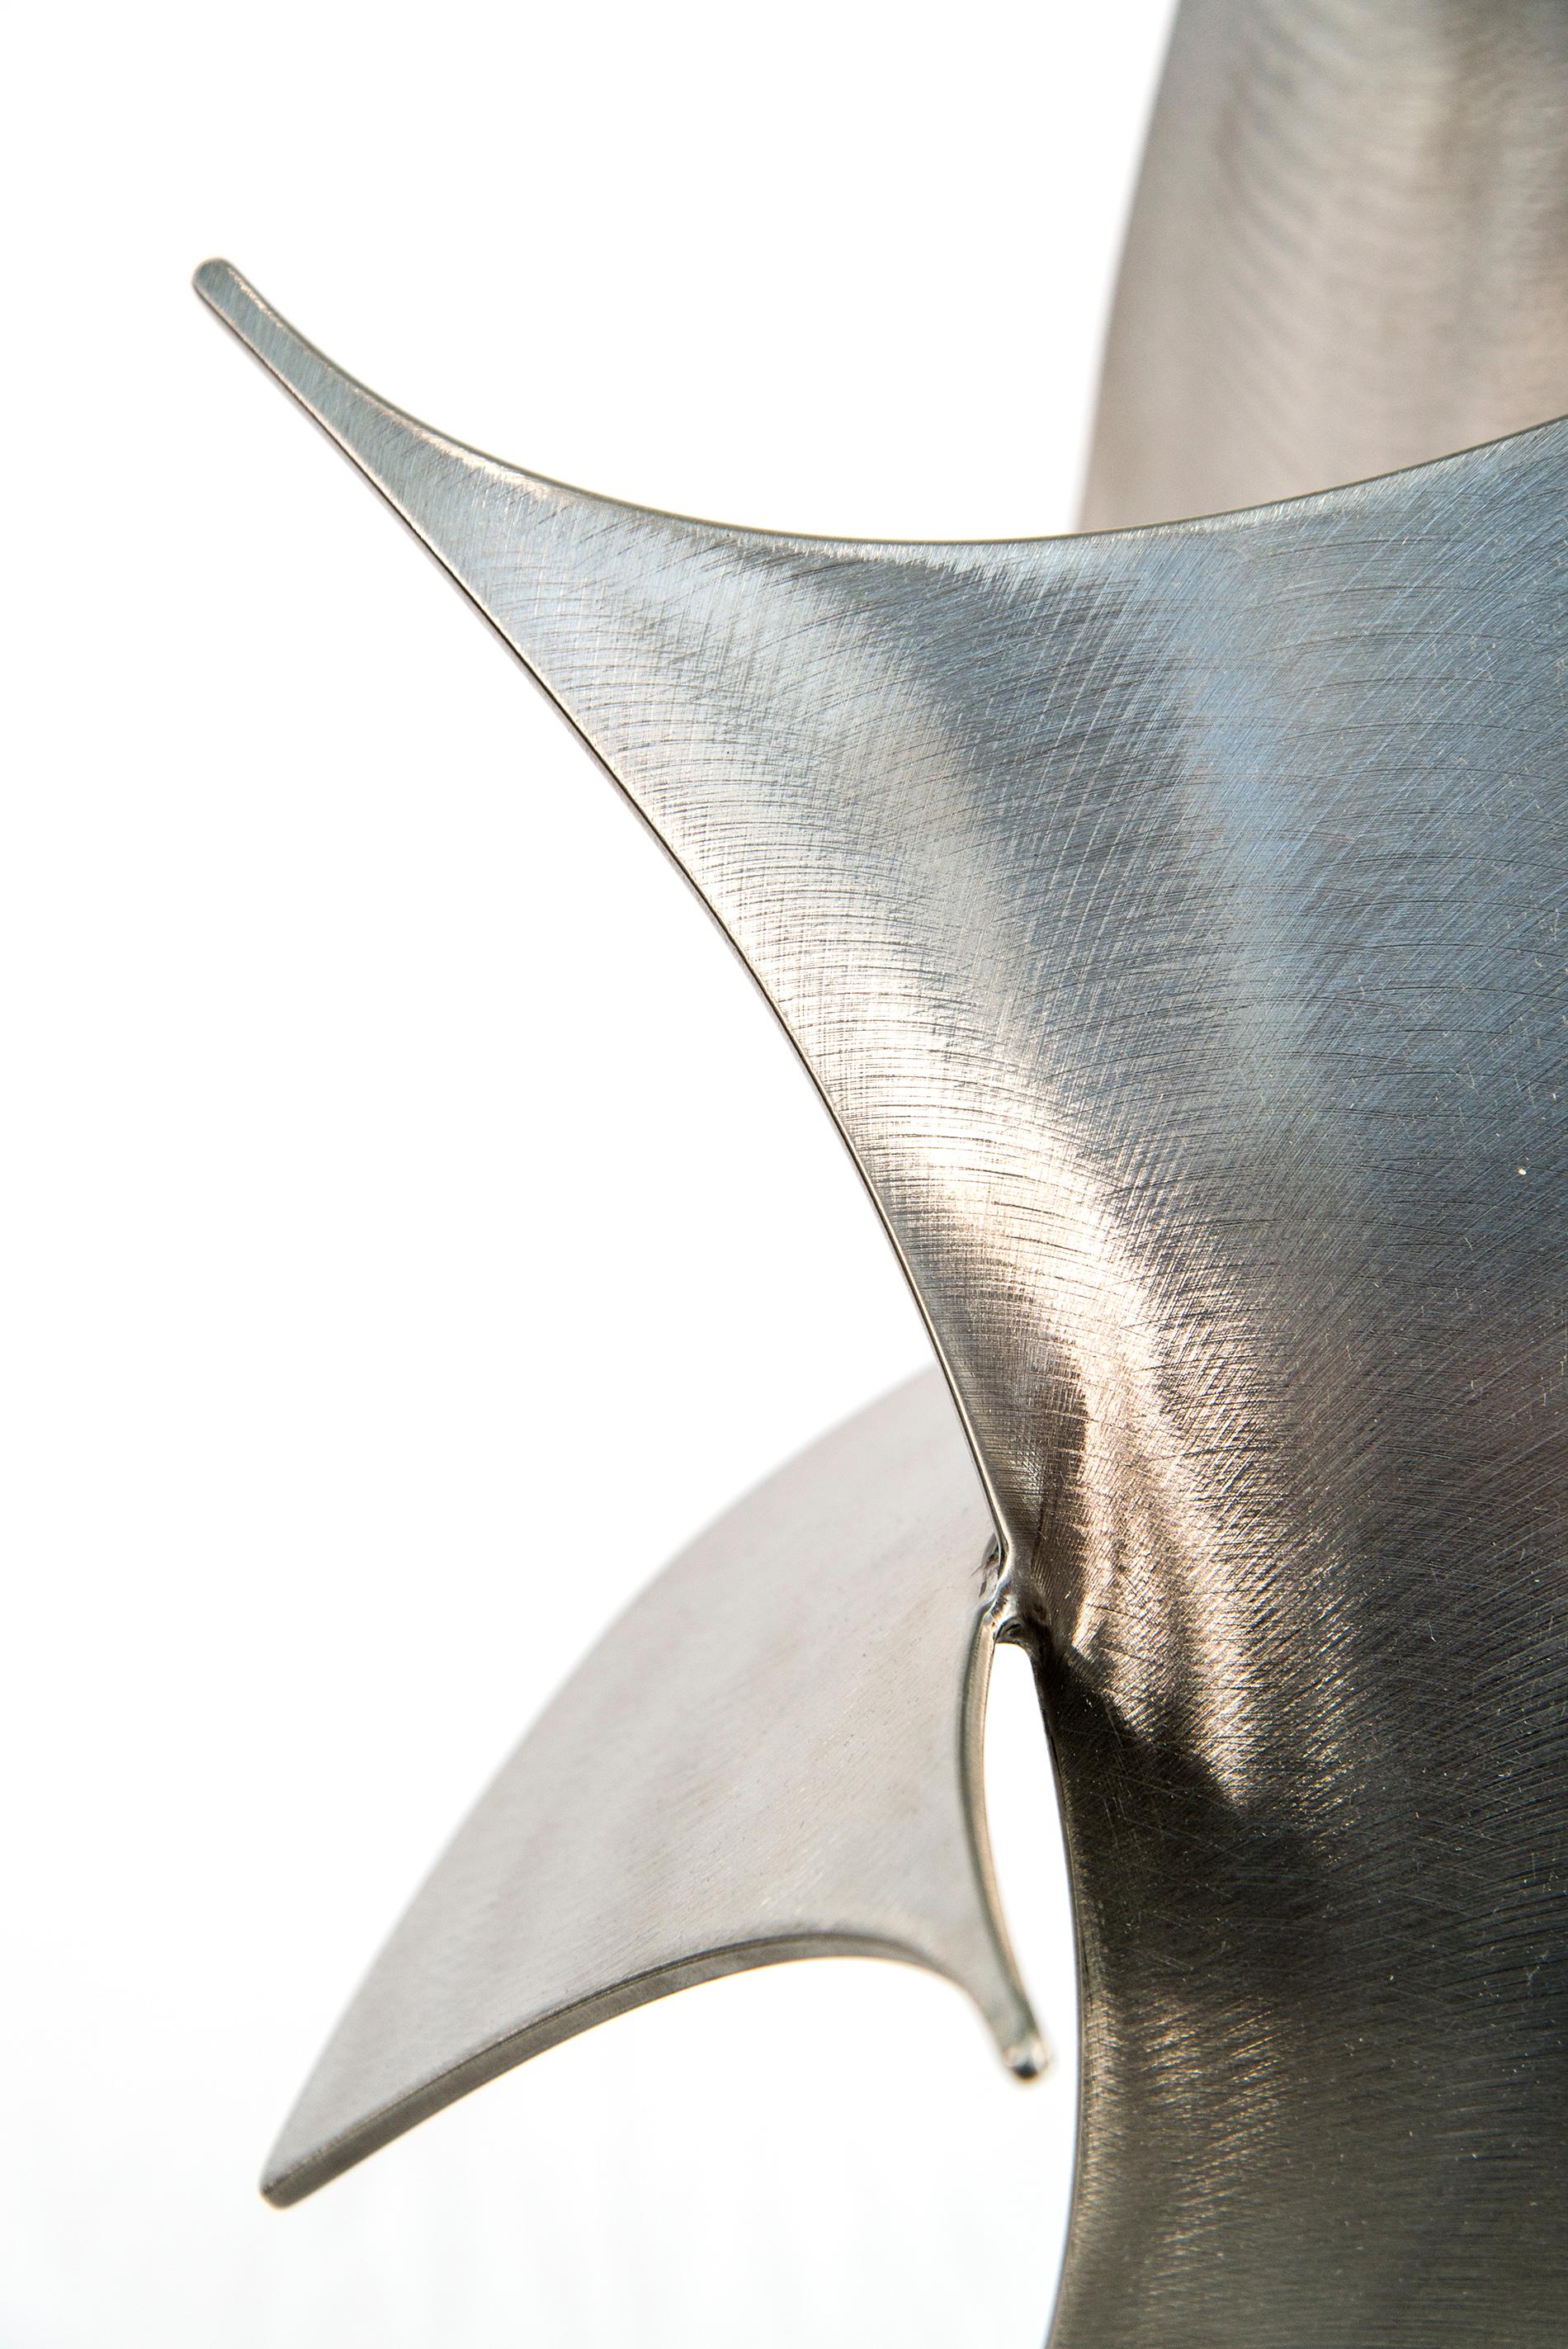 Elegant Movements 171 - contemporary, abstract, forged stainless steel sculpture - Contemporary Sculpture by Kevin Robb